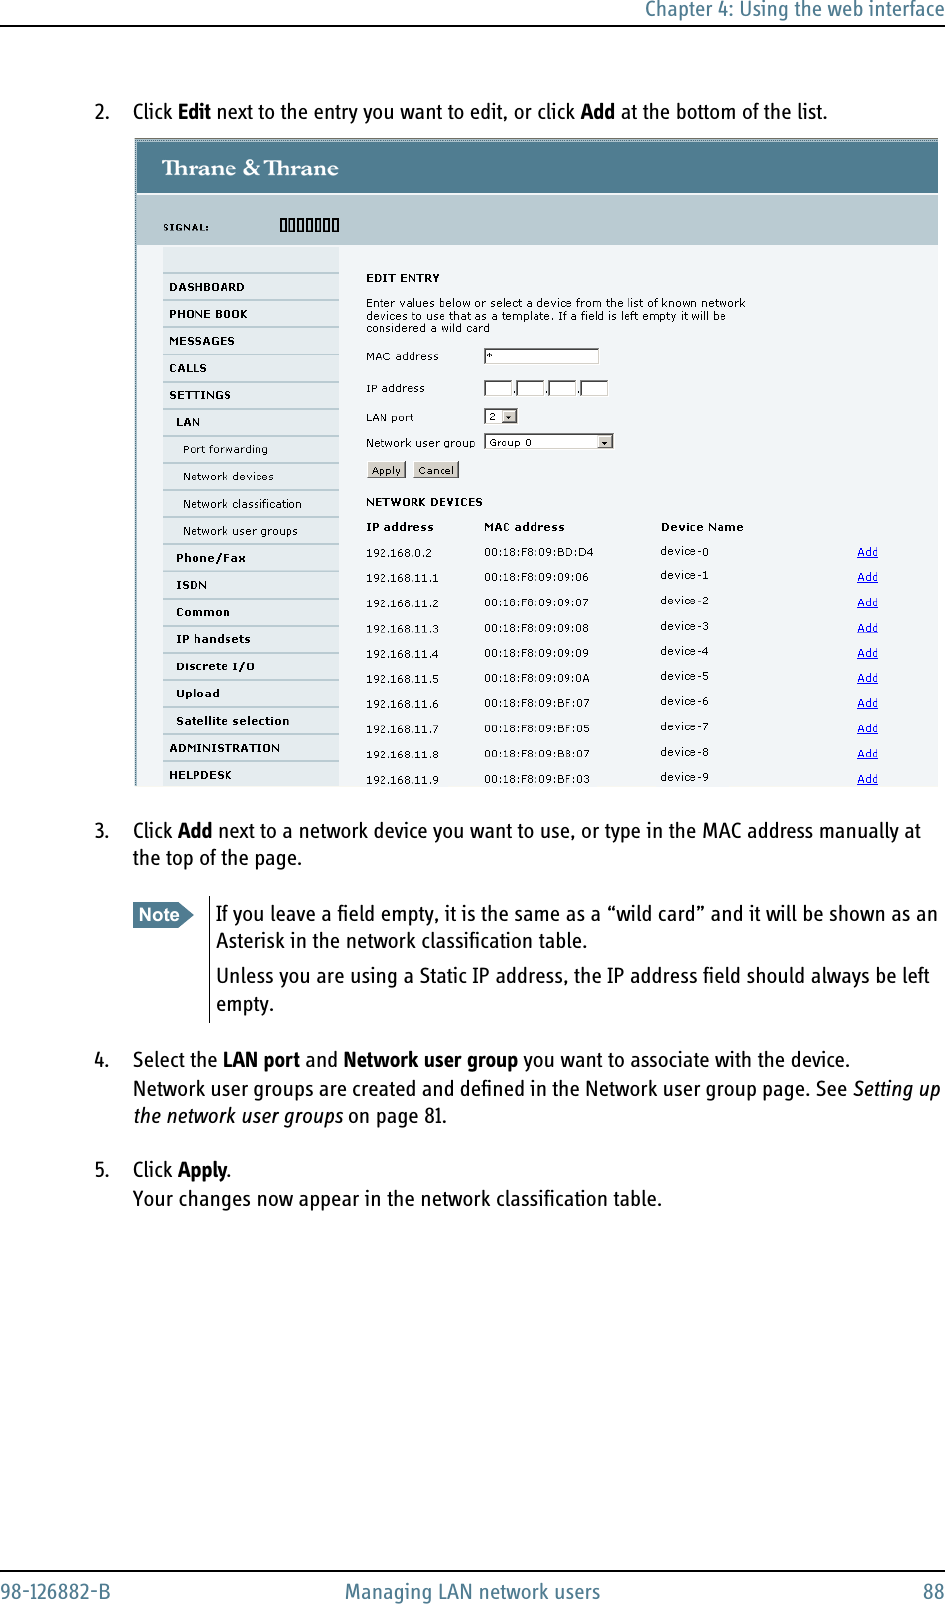 Chapter 4: Using the web interface98-126882-B Managing LAN network users 882. Click Edit next to the entry you want to edit, or click Add at the bottom of the list.3. Click Add next to a network device you want to use, or type in the MAC address manually at the top of the page.4. Select the LAN port and Network user group you want to associate with the device.Network user groups are created and defined in the Network user group page. See Setting up the network user groups on page 81.5. Click Apply.Your changes now appear in the network classification table.Note If you leave a field empty, it is the same as a “wild card” and it will be shown as an Asterisk in the network classification table.Unless you are using a Static IP address, the IP address field should always be left empty.